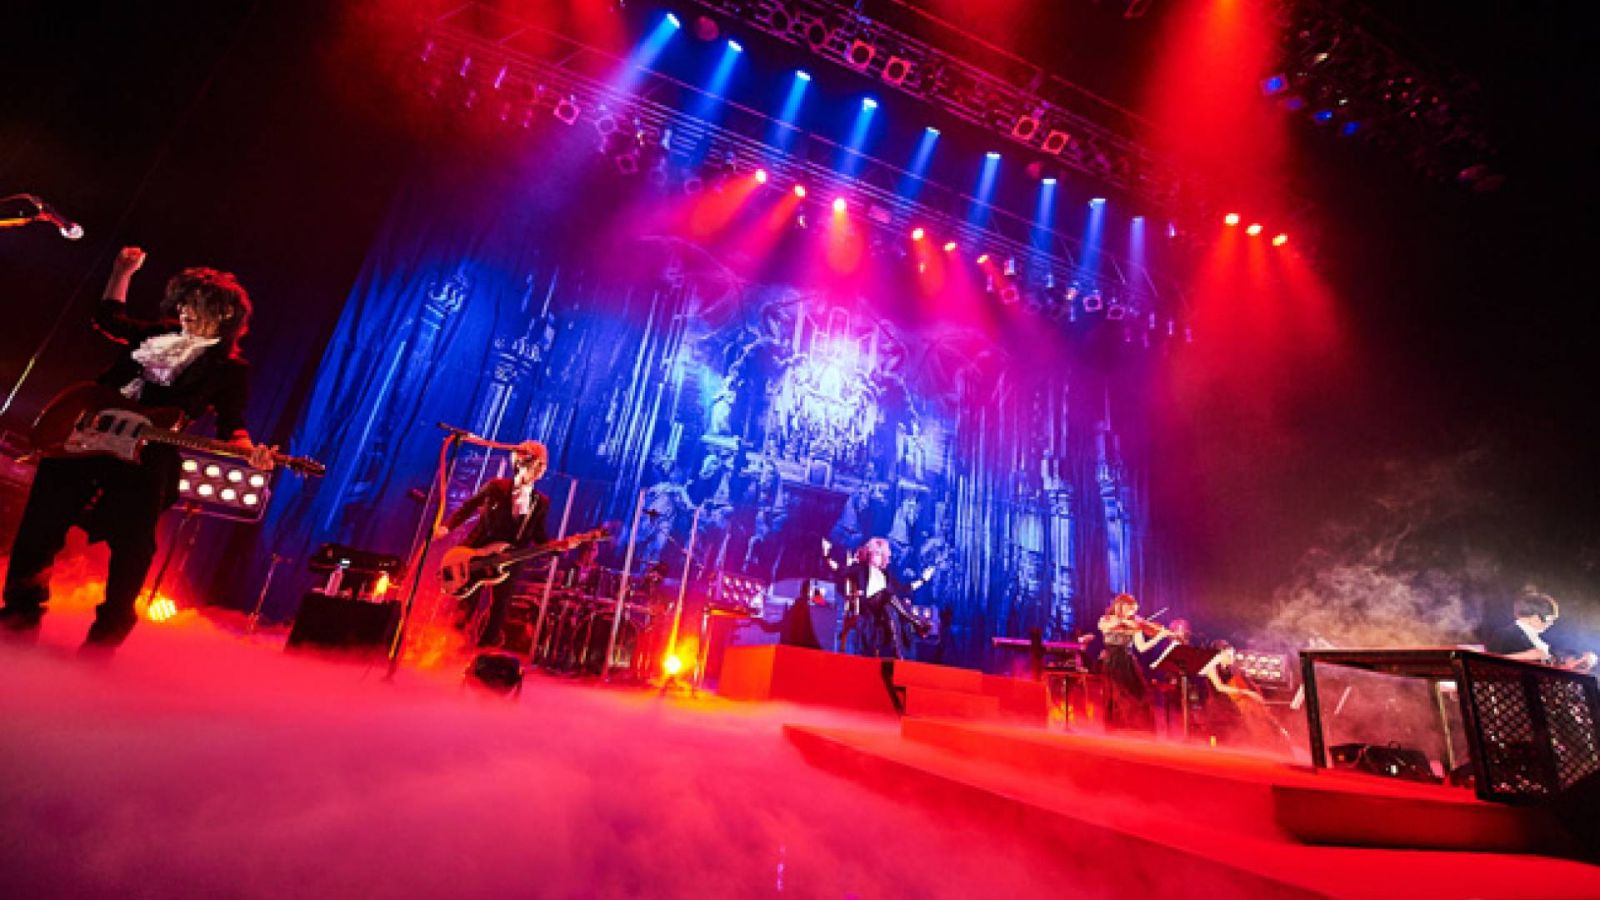 KAMIJO “Epic Rock Orchestra” в Zepp DiverCity © CHATEAU AGENCY. All rights reserved.